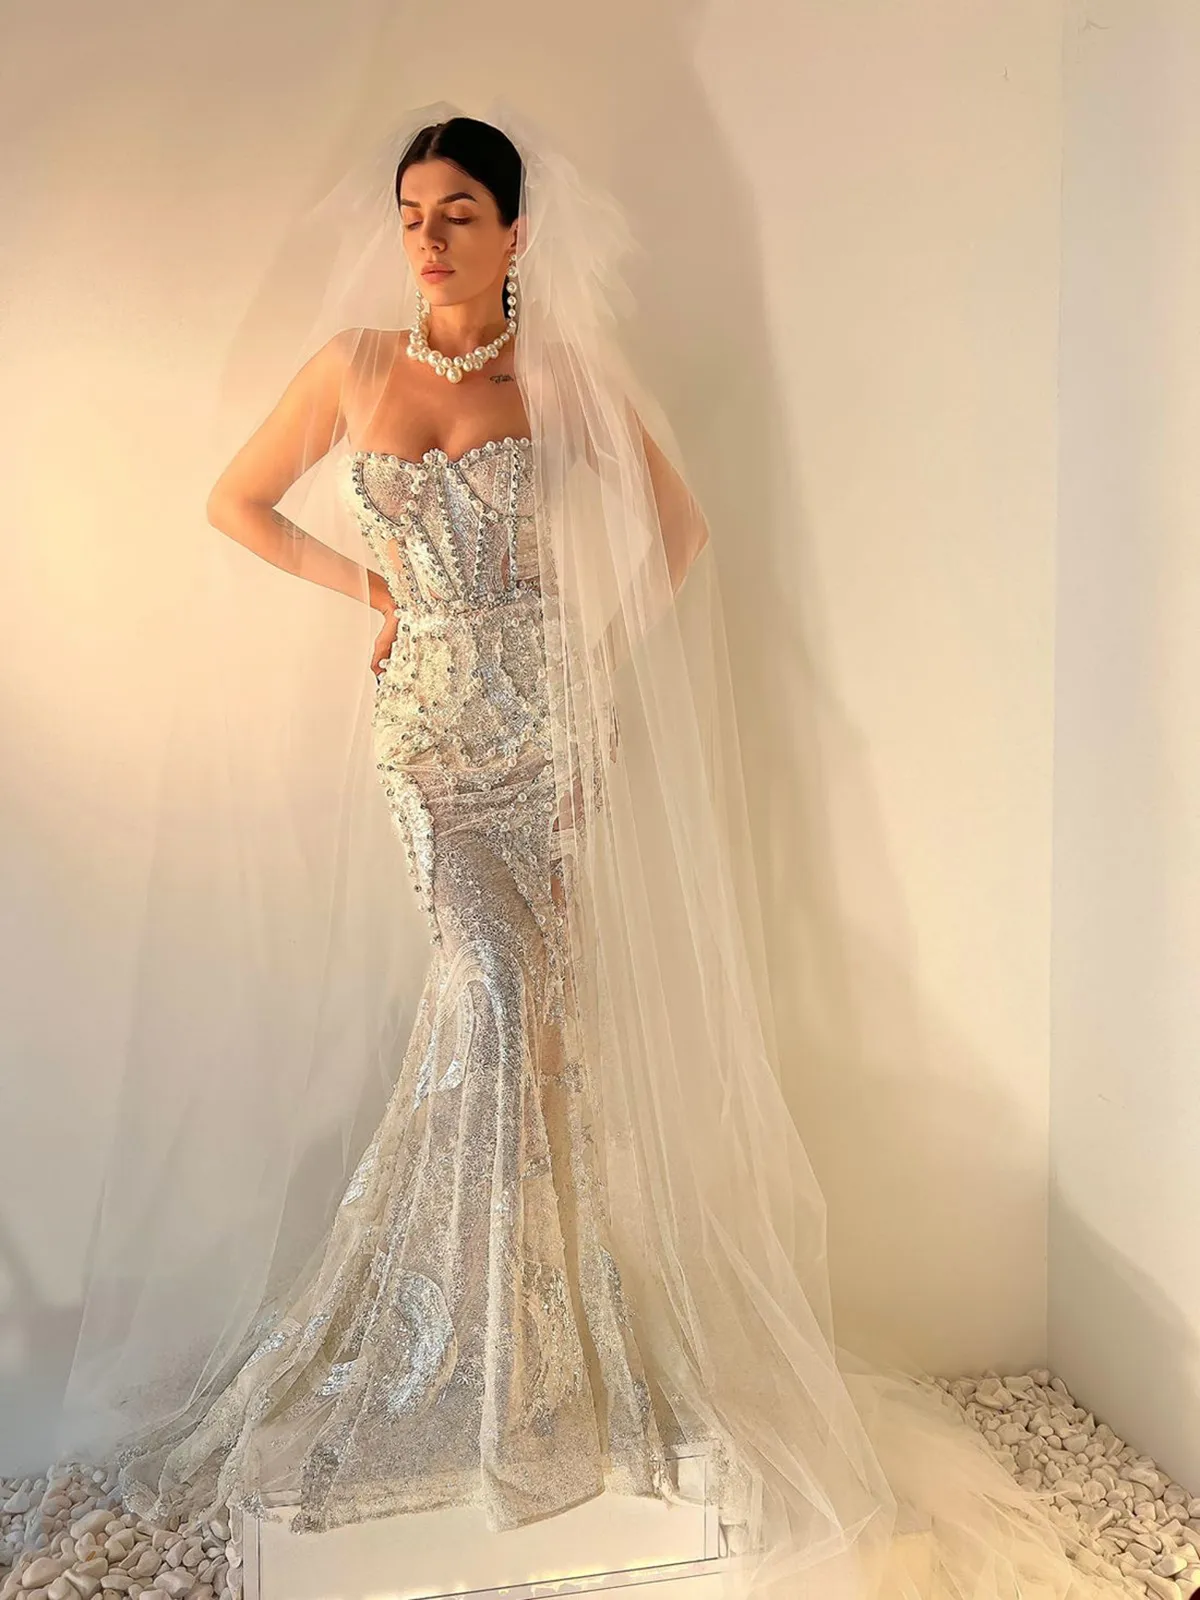 Gorgeous Mermaid Wedding Dresses Sweetheart Sleeveless Pearls Applicants on Tulle Court Gown Backless Custom Custom Made Plus Size Bridal Gown Vestidos De Novia